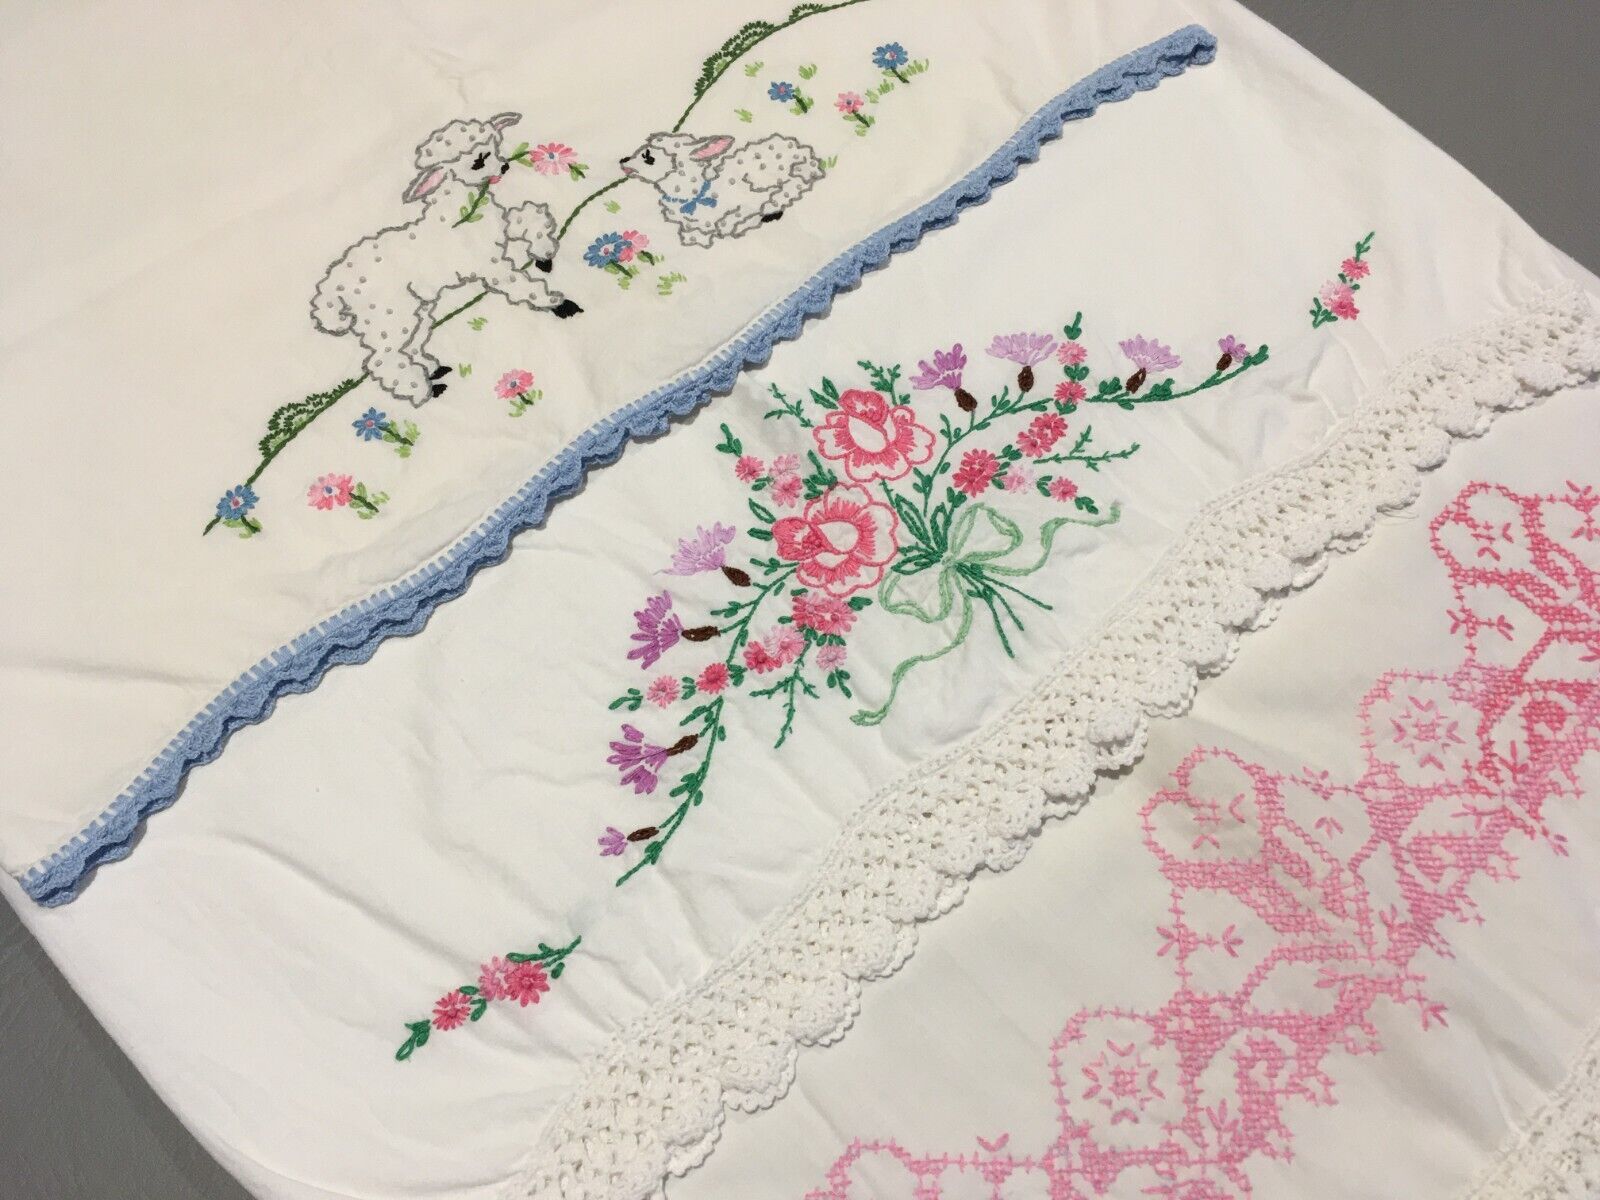 VTG Embroidered Flower Floral Lamb Crochet Pillowcases Granny Core Lot of 3 READ